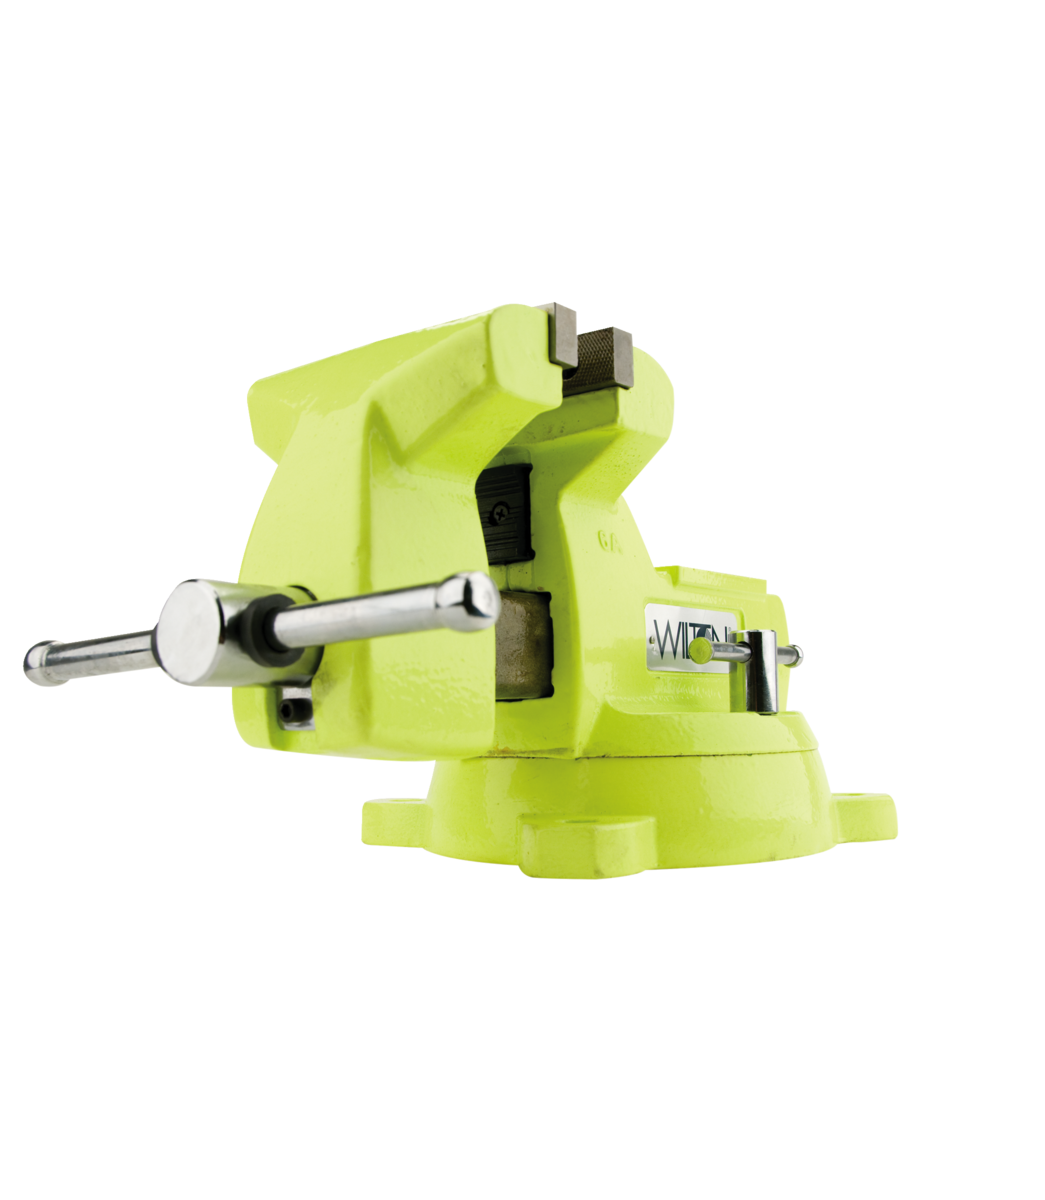 WILTON 6" High-Visibility Safety Vise